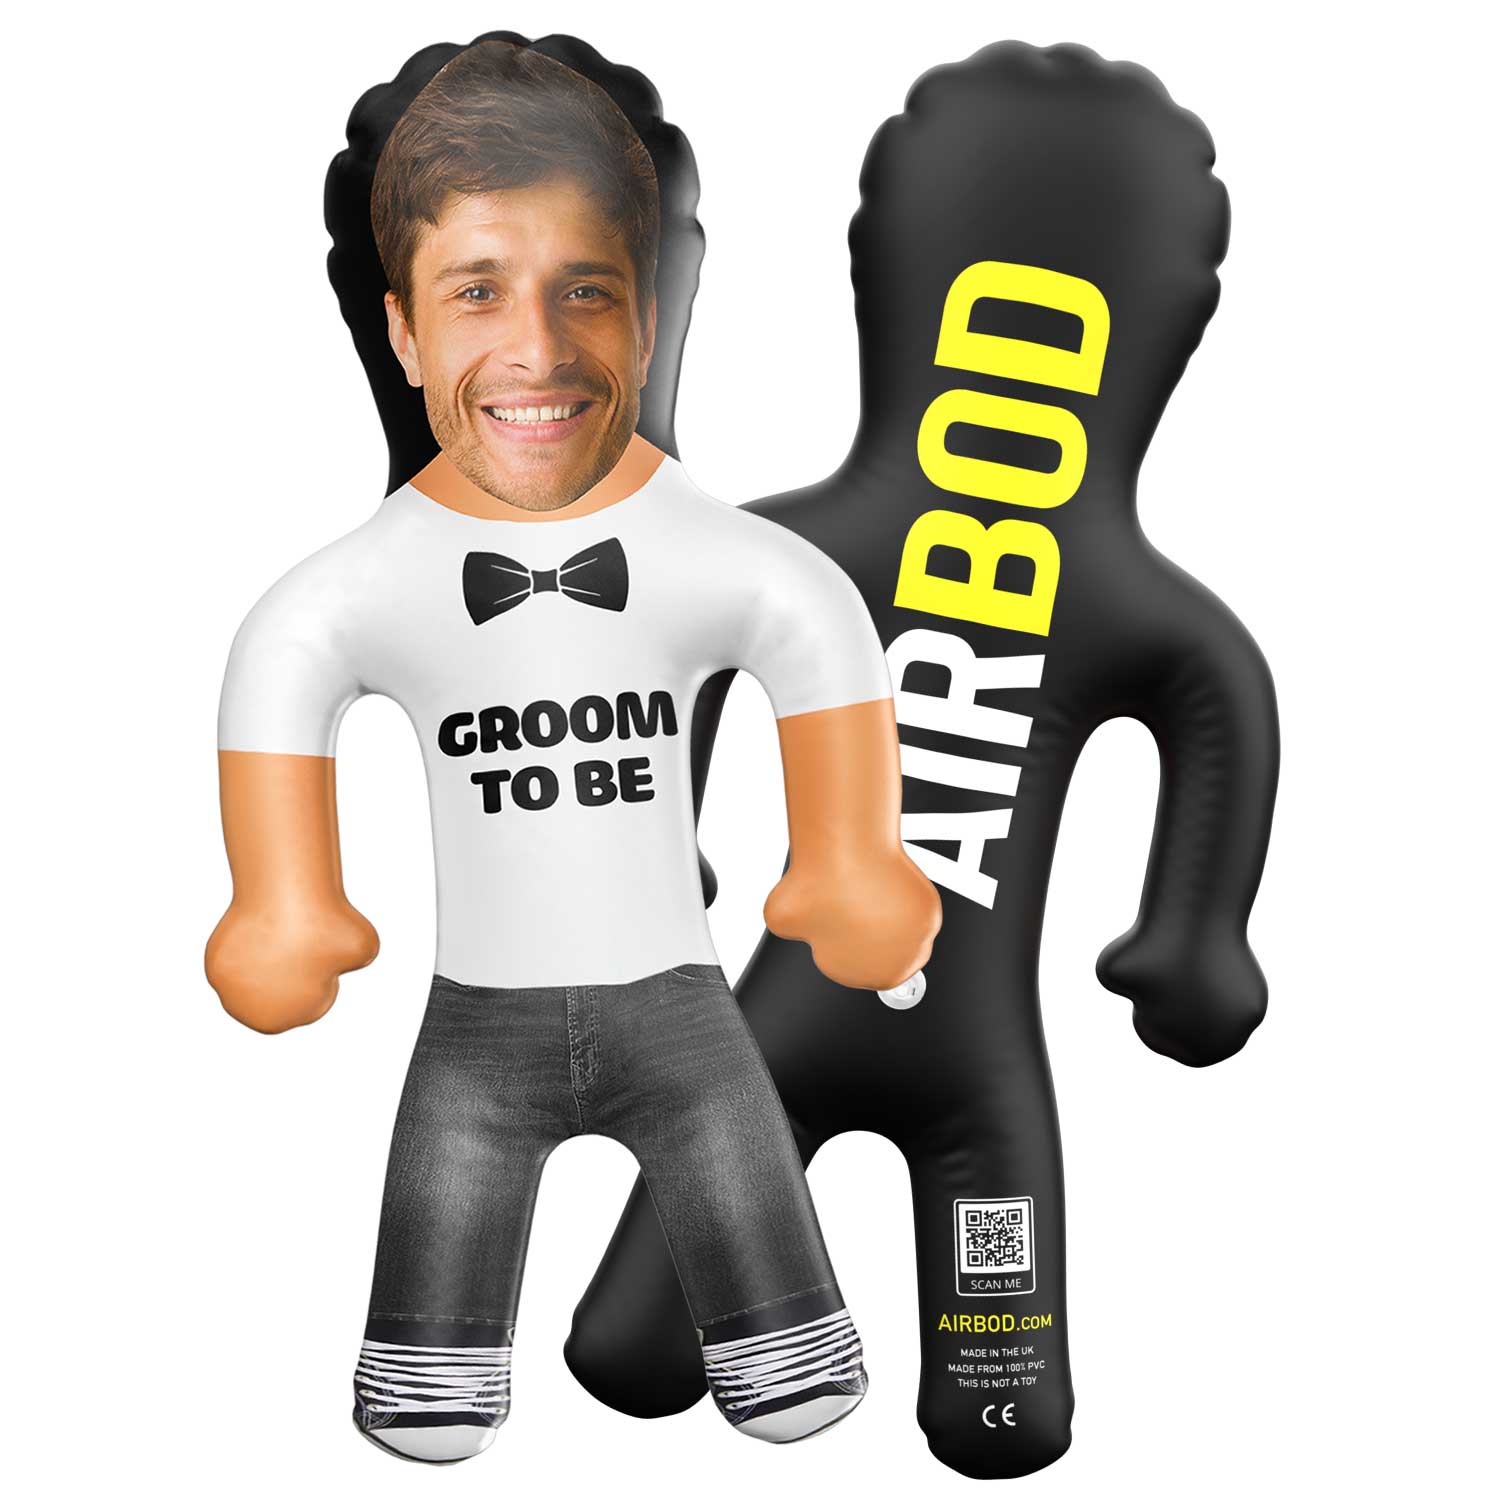 Groom to Be Blow Up Doll